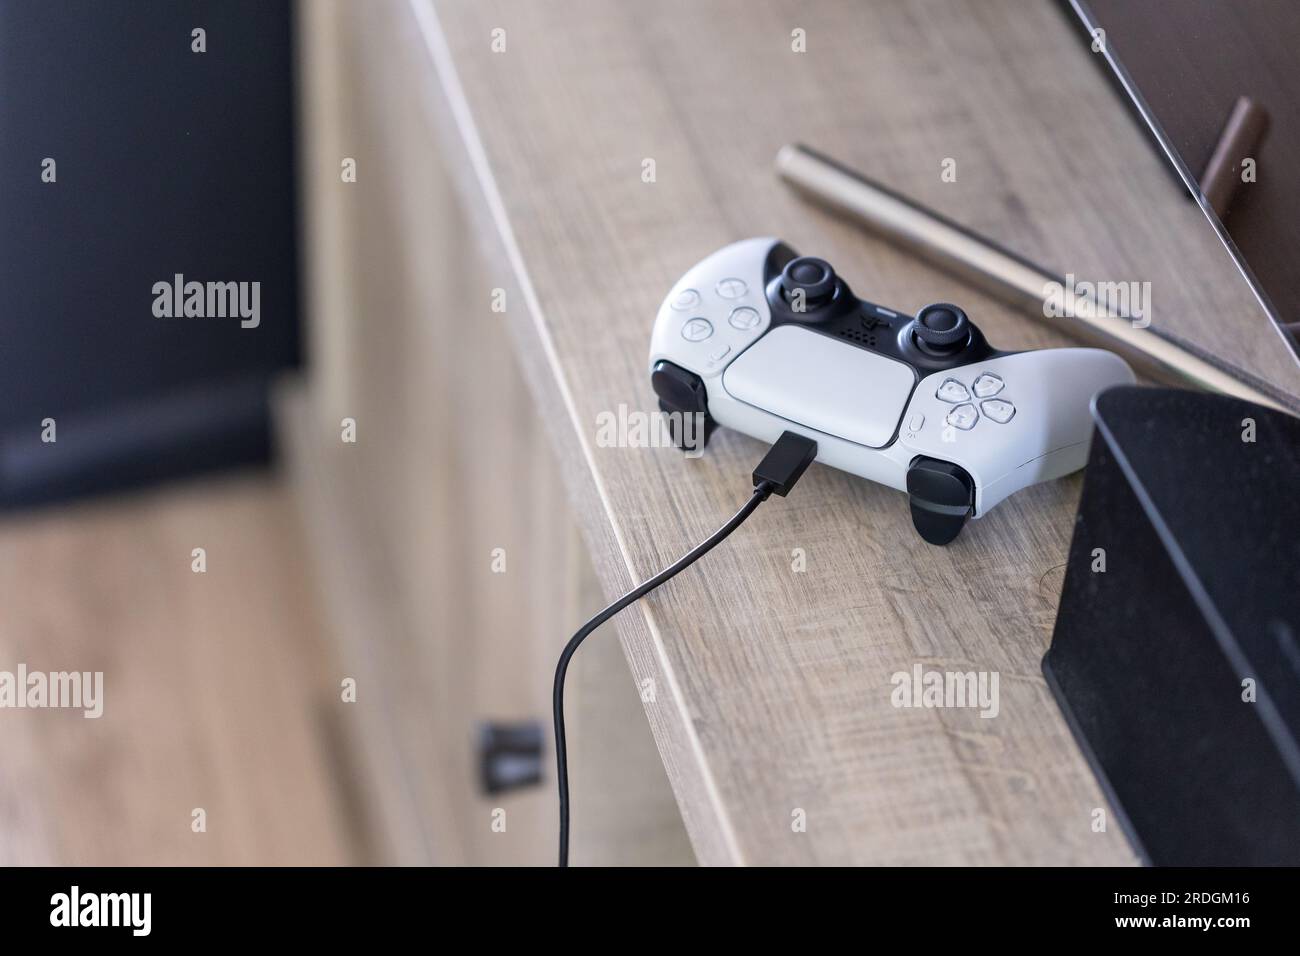 Brecht, Belgium - 14 july 2023: A portrait of a standard white and black  playstation 5 game controller charging with a usb c cable in its port. The  PS Stock Photo - Alamy